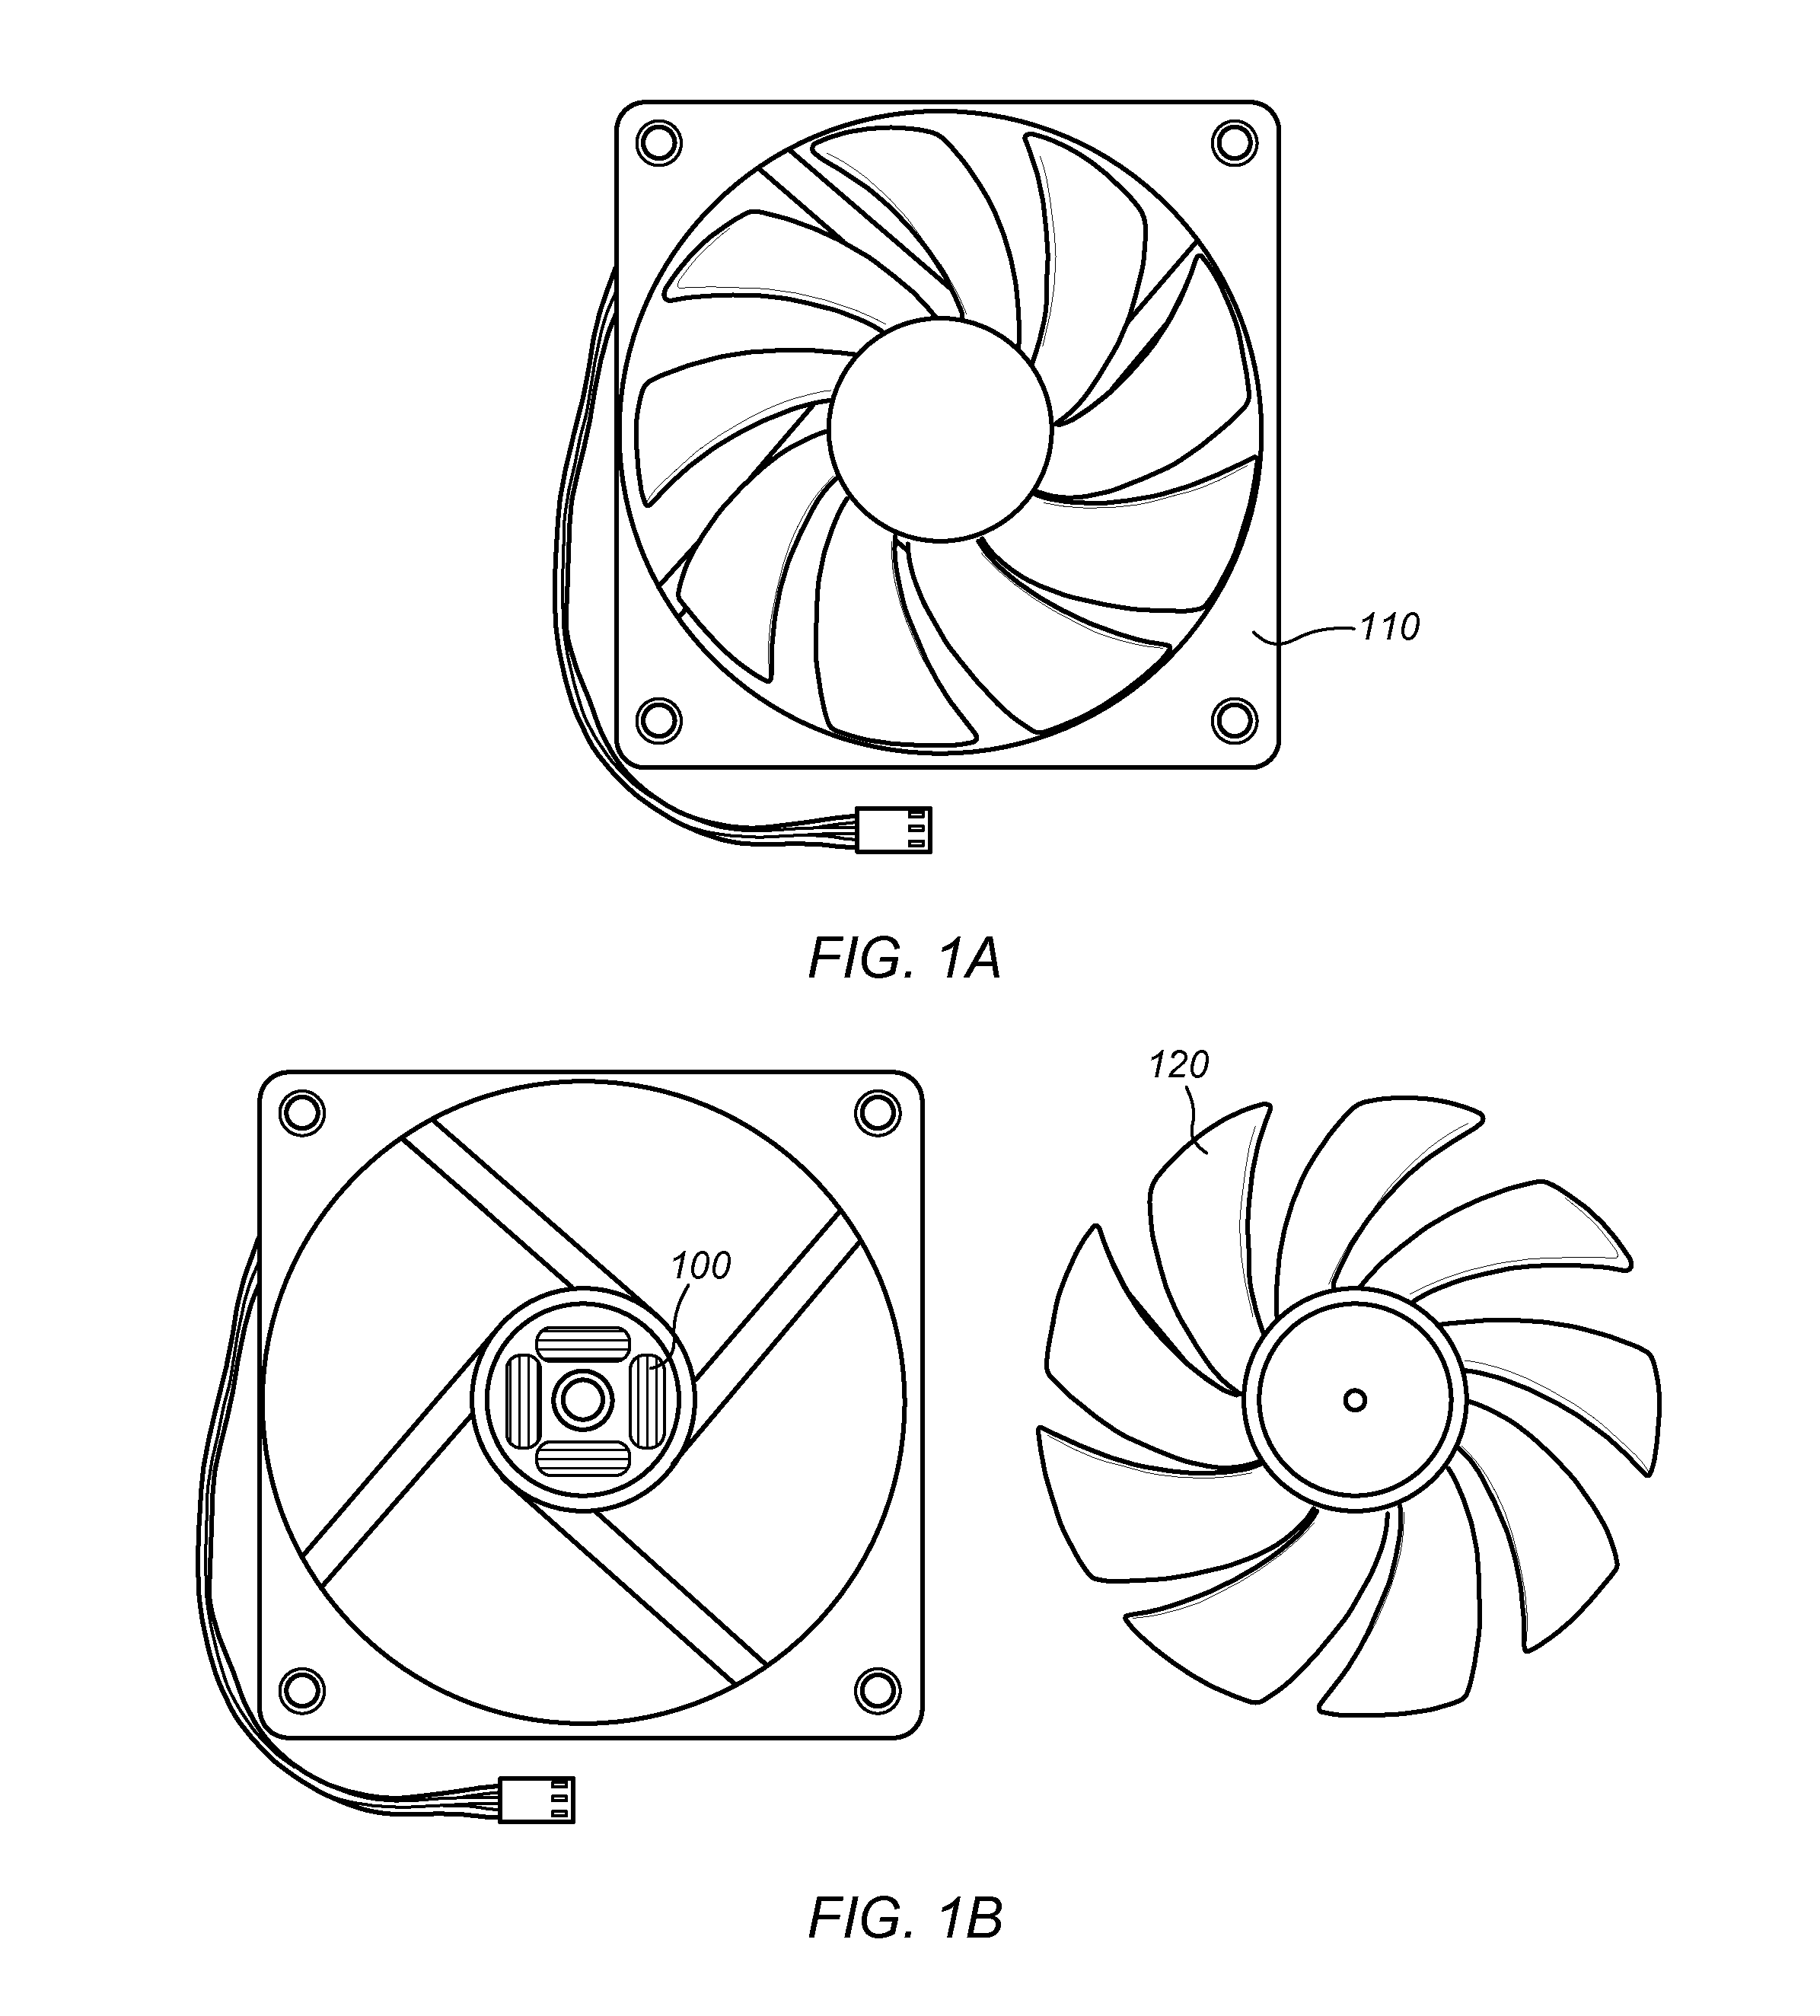 System and Method for Aligning a Rotor to a Known Position